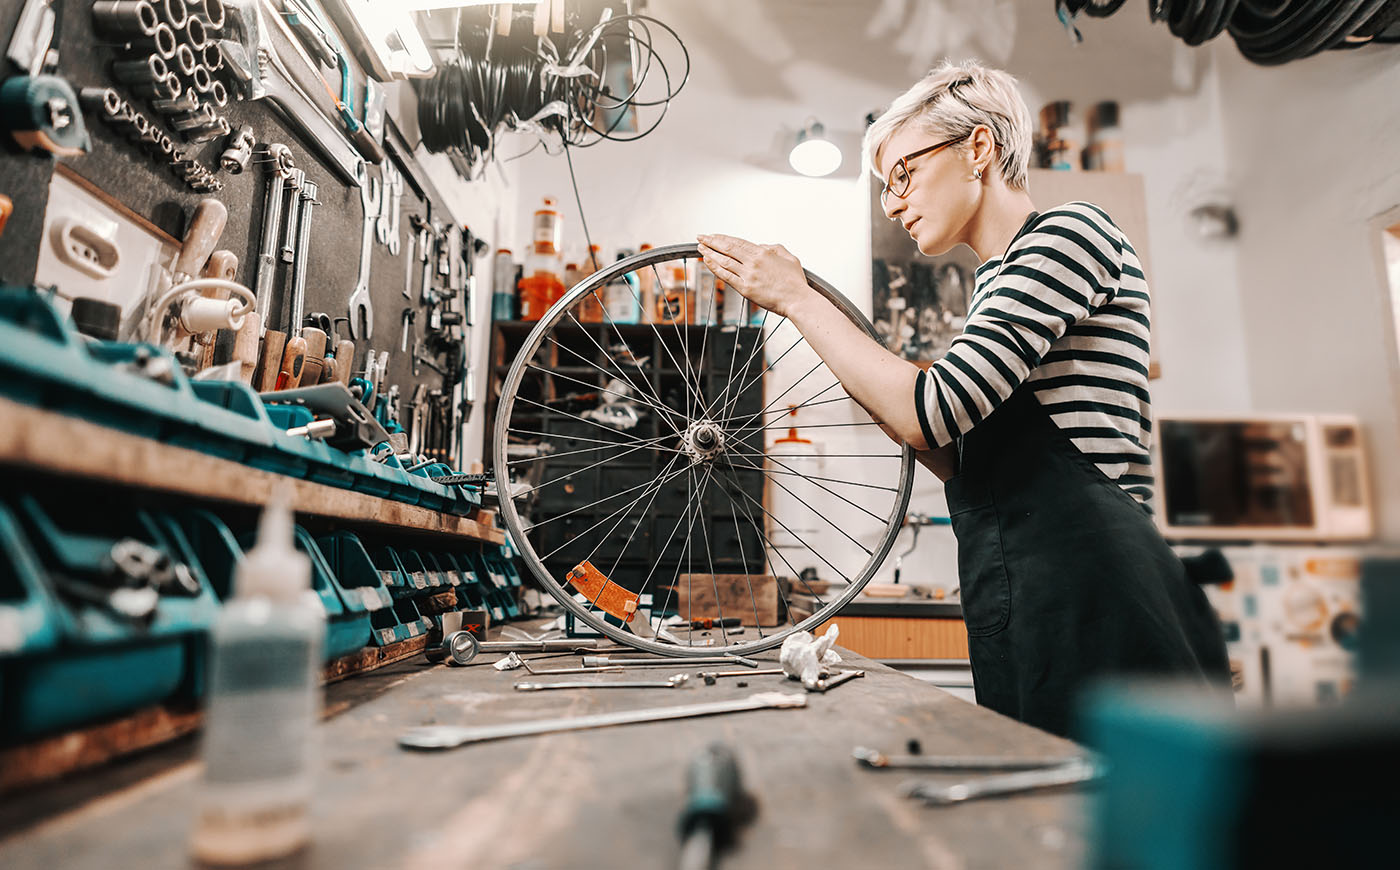 Young artistic woman crafts a bicycle wheel surrounded by tools in a workshop setting